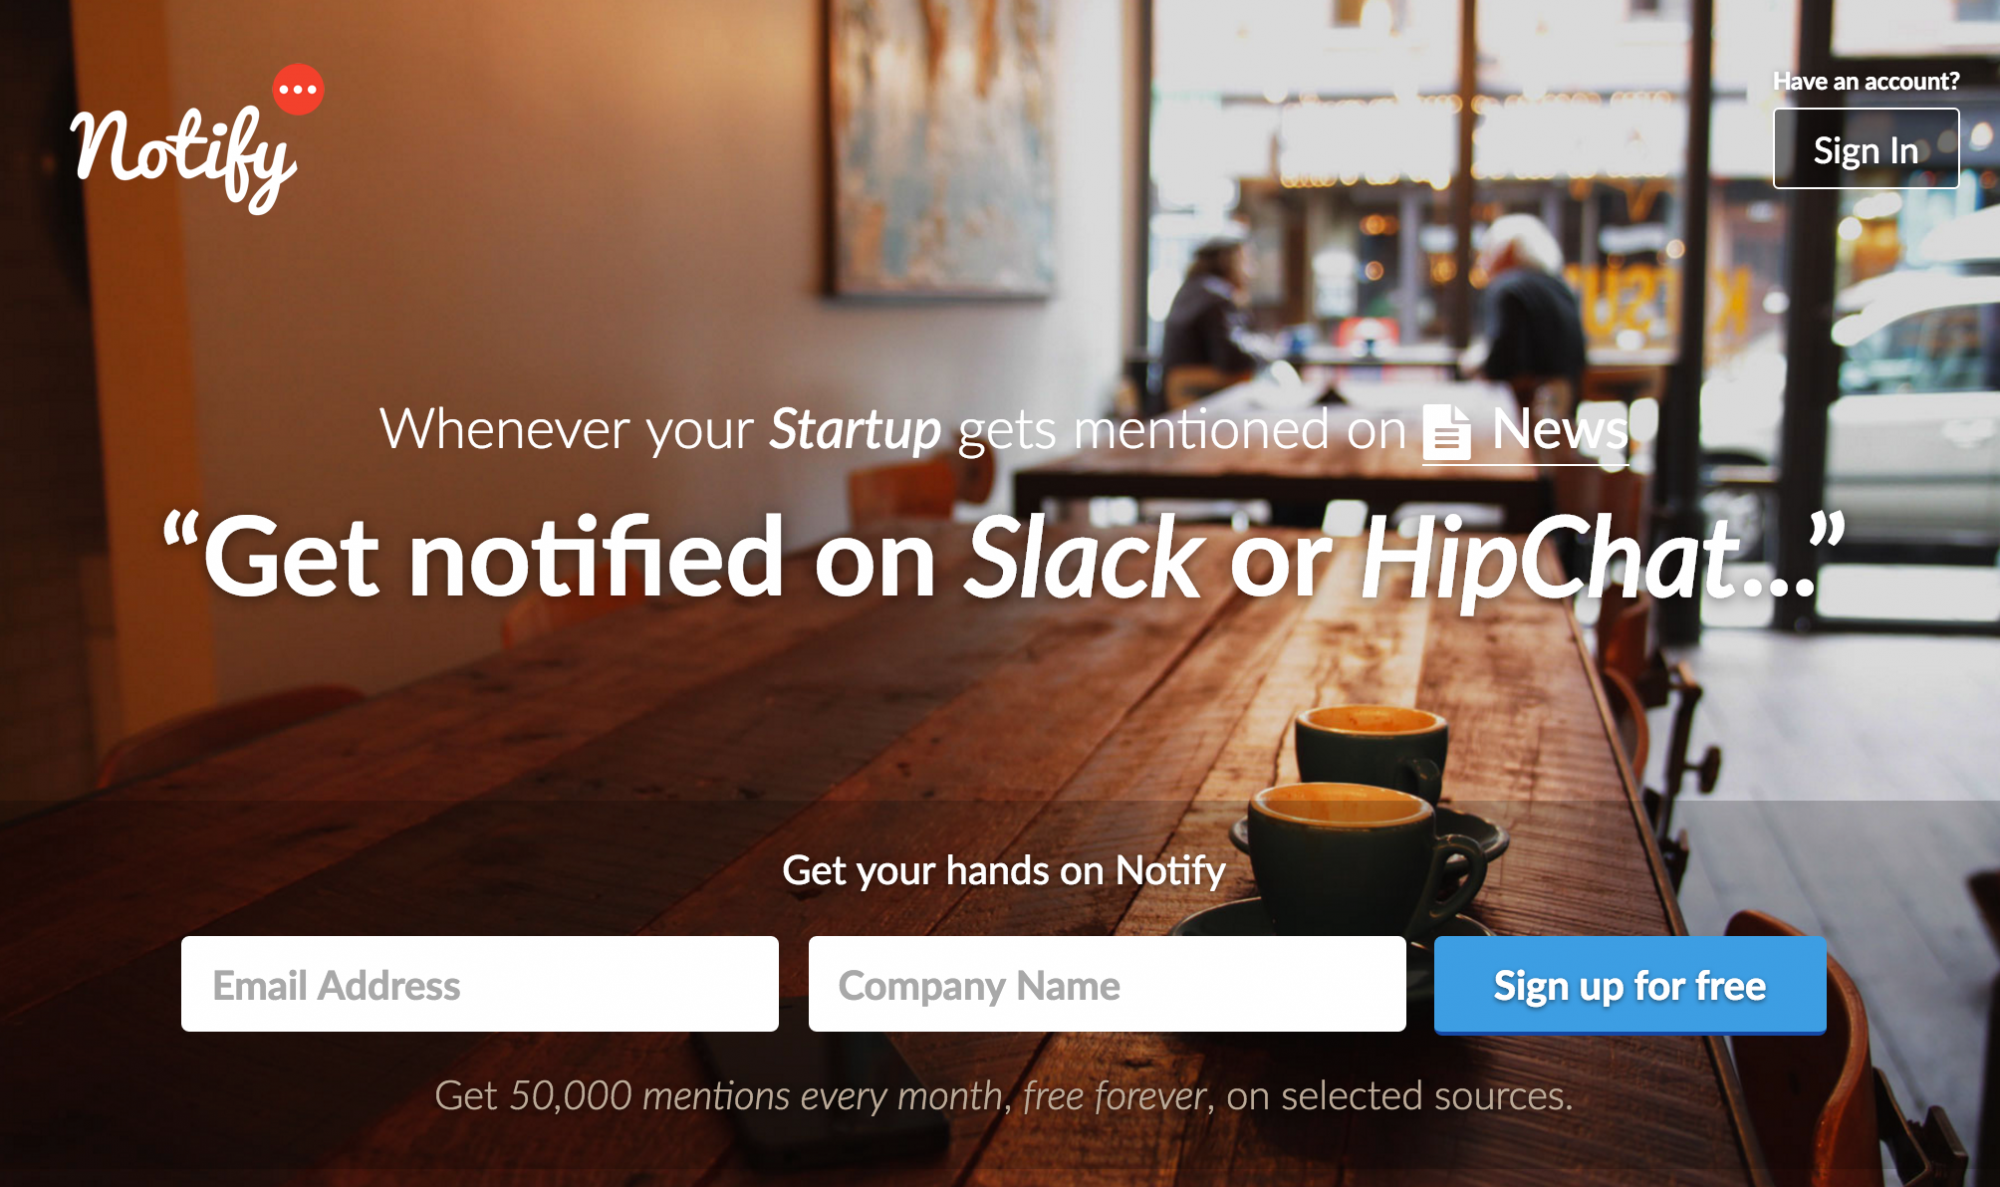 Notify – Get notified in Slack when your startup is mentioned online